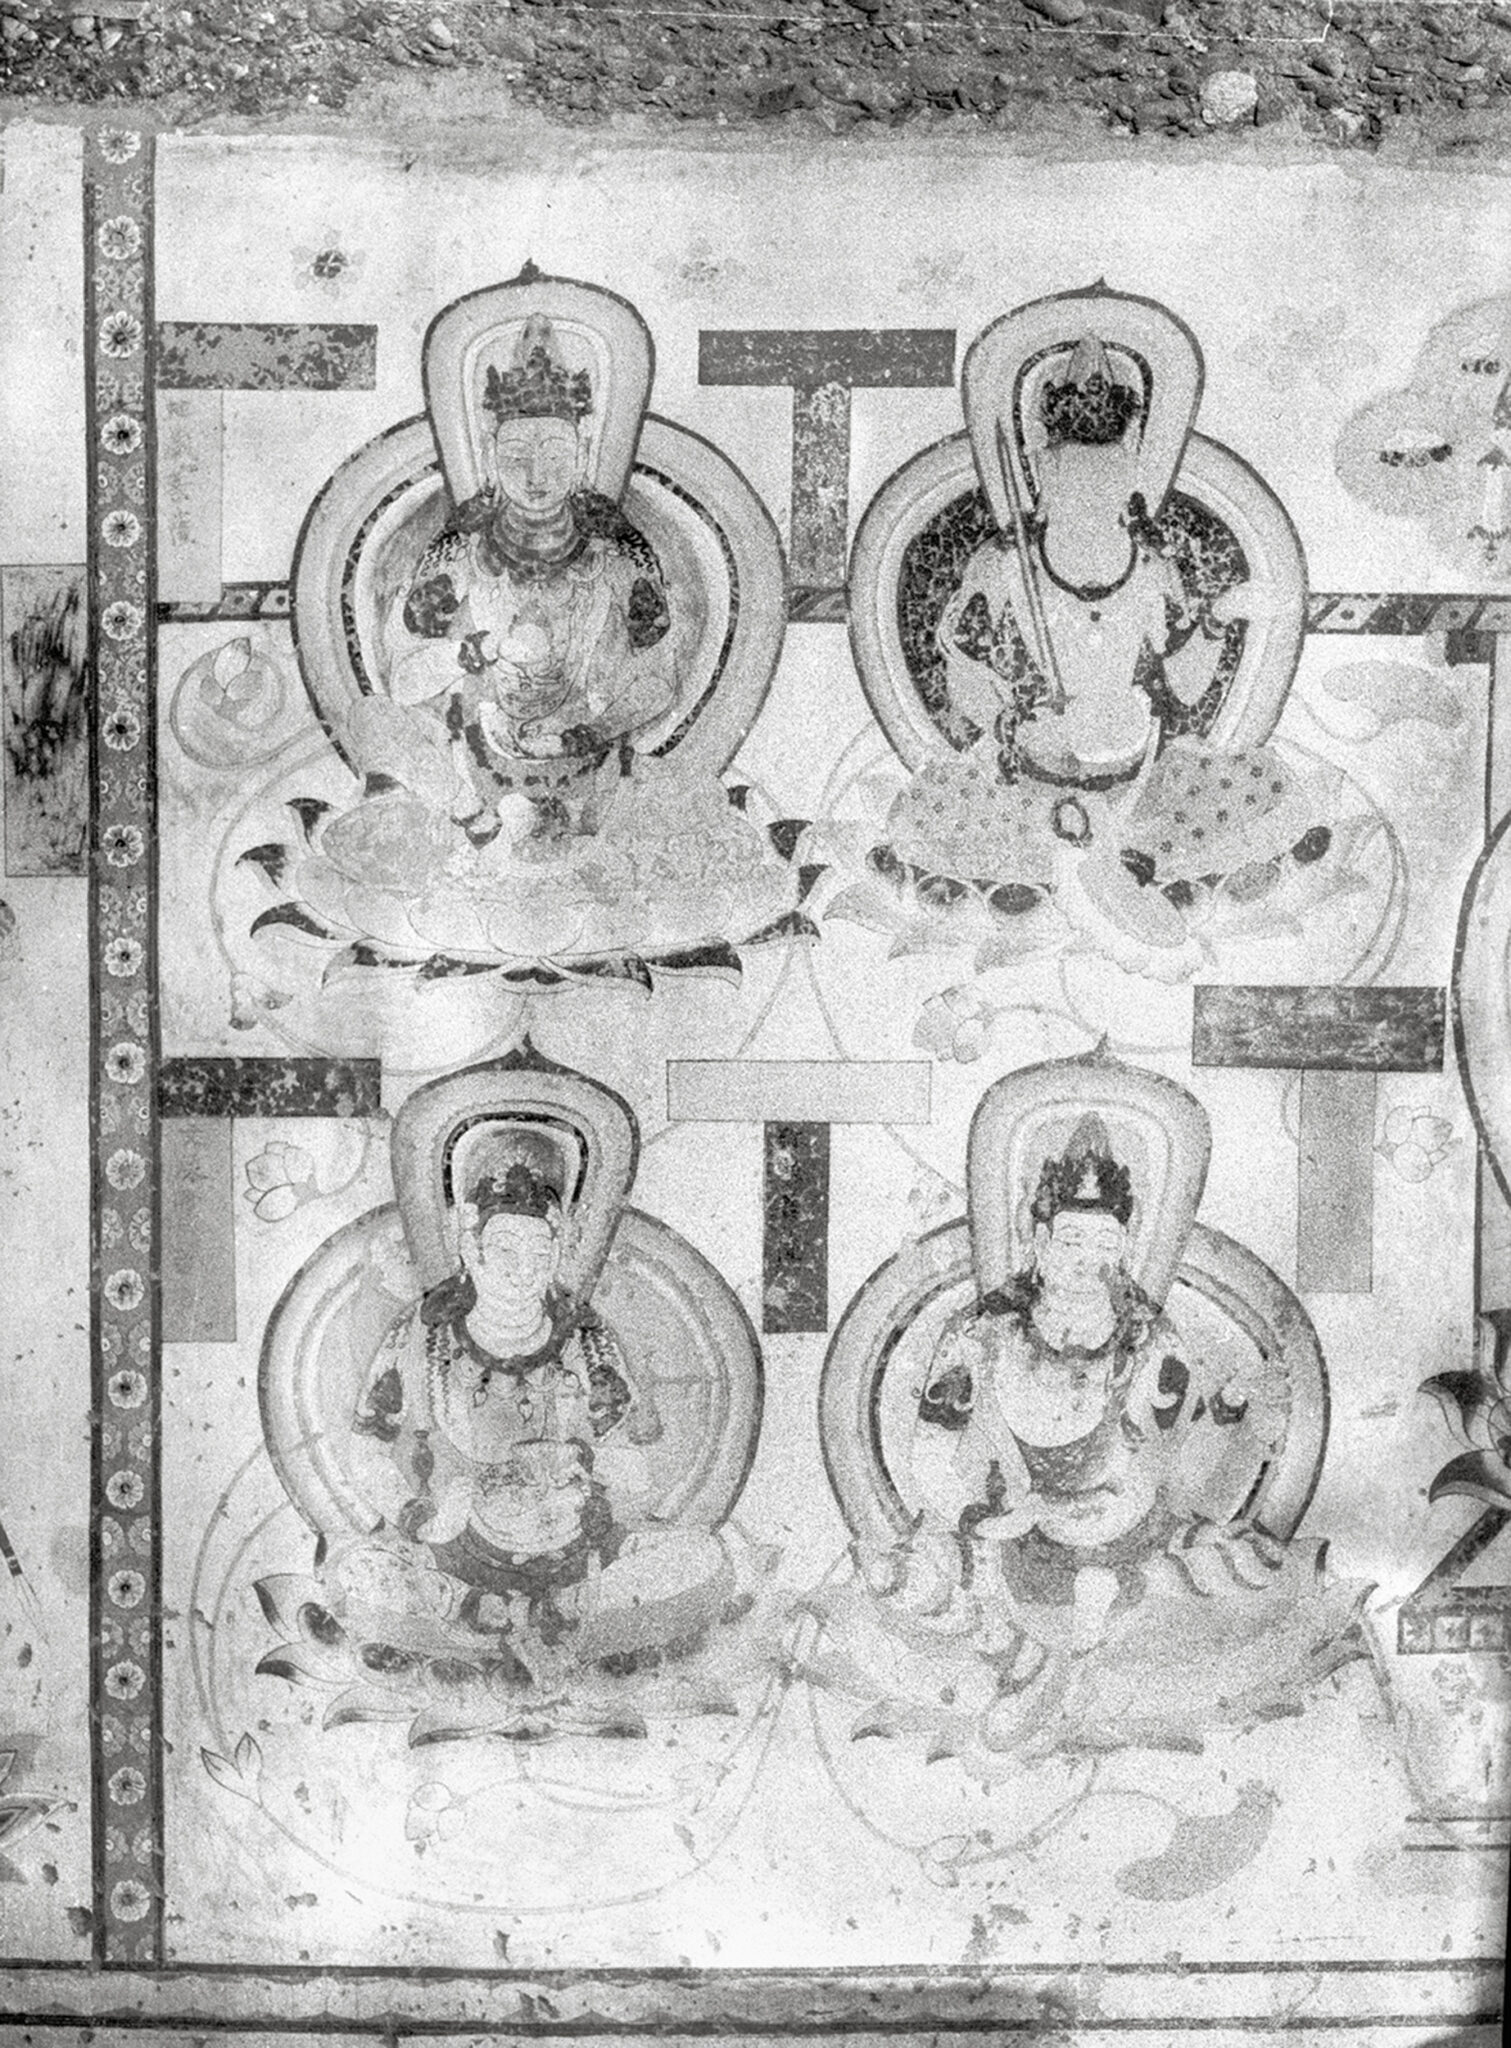 Black and white image of wall painting depicting four haloed deities seated on lotus pedestals